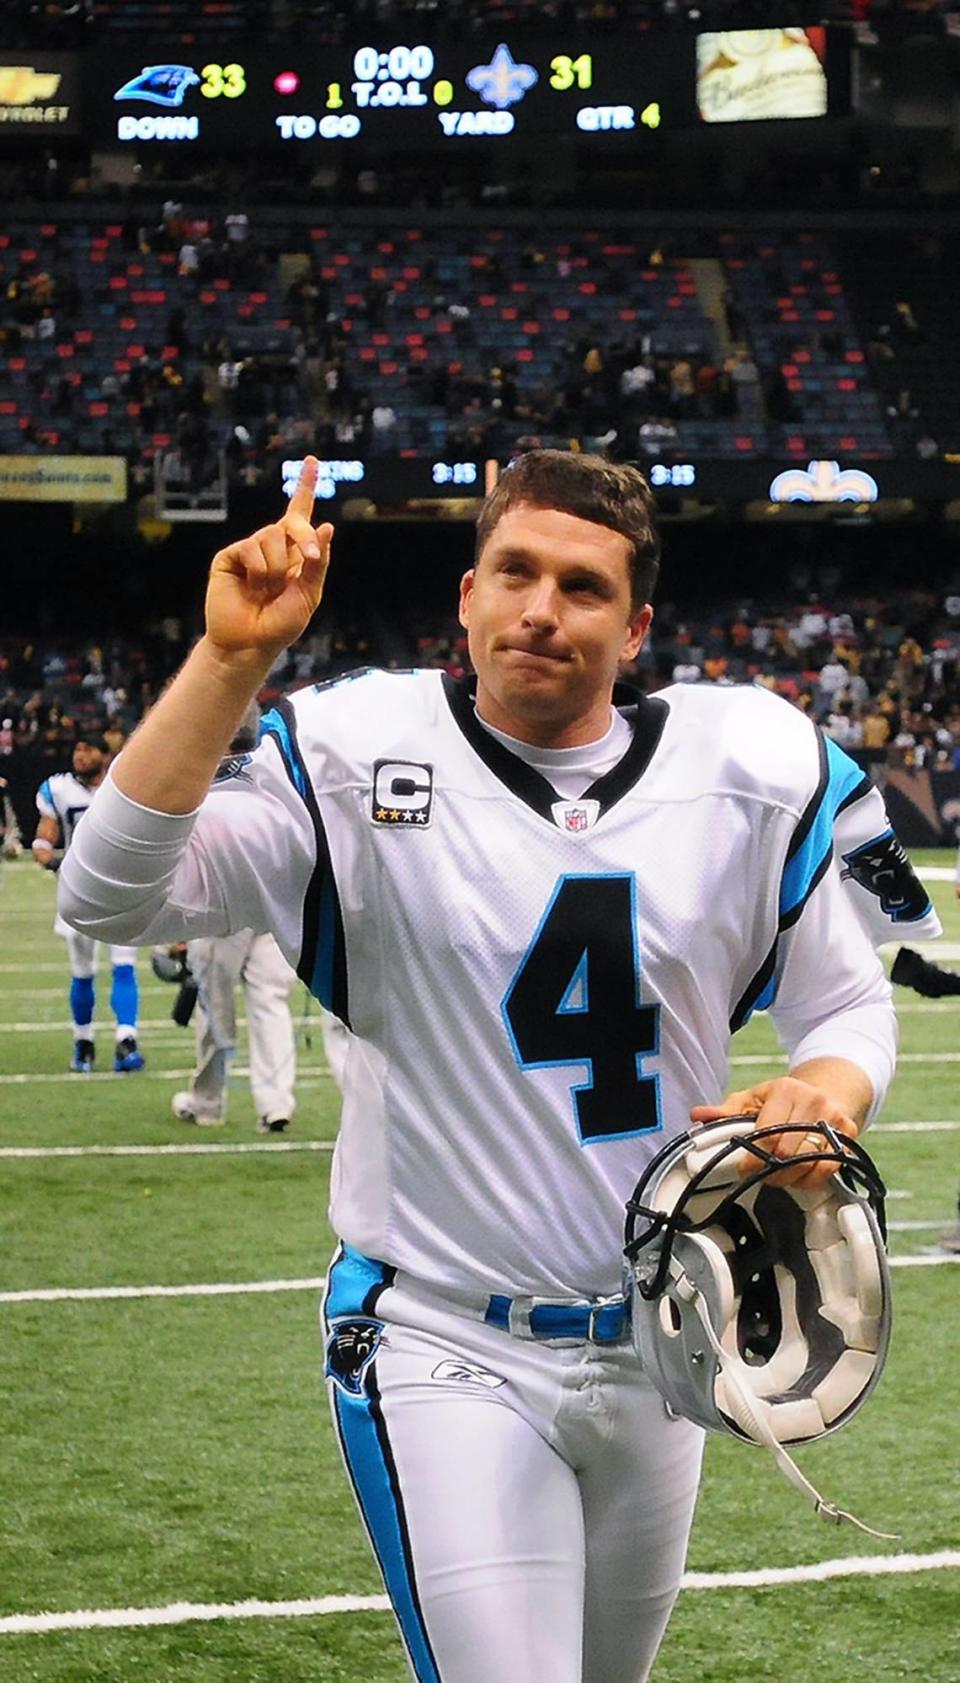 Carolina Panthers kicker John Kasay celebrates the team’s 33-31 victory over the New Orleans Saints Sunday as he runs off the field in New Orleans on Dec. 28, 2008. Kasay kicked the game-winning, 42-yard field goal. He ended his career with 1482 points with the Panthers, more than 700 more than any other Carolina player.